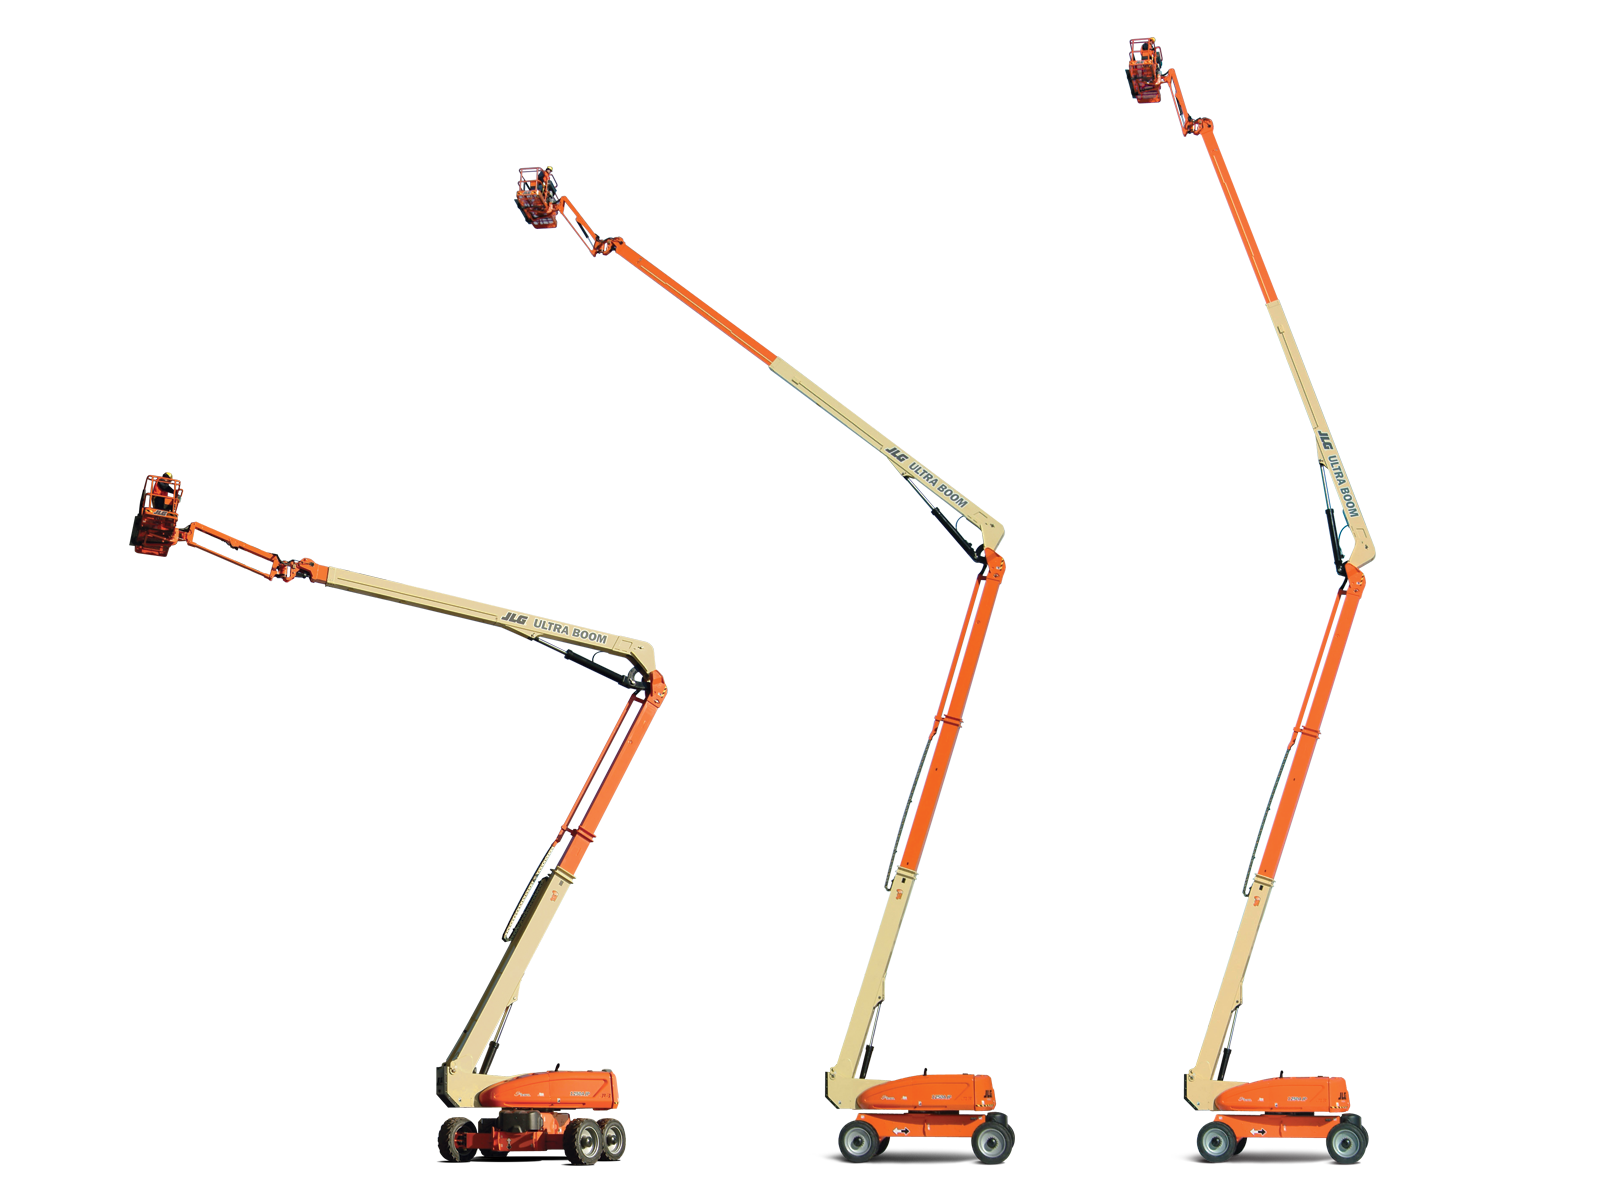 JLG 1250AJP | Articulated Manlifts on Rent | WESTERN INDIA SKY LIFTER